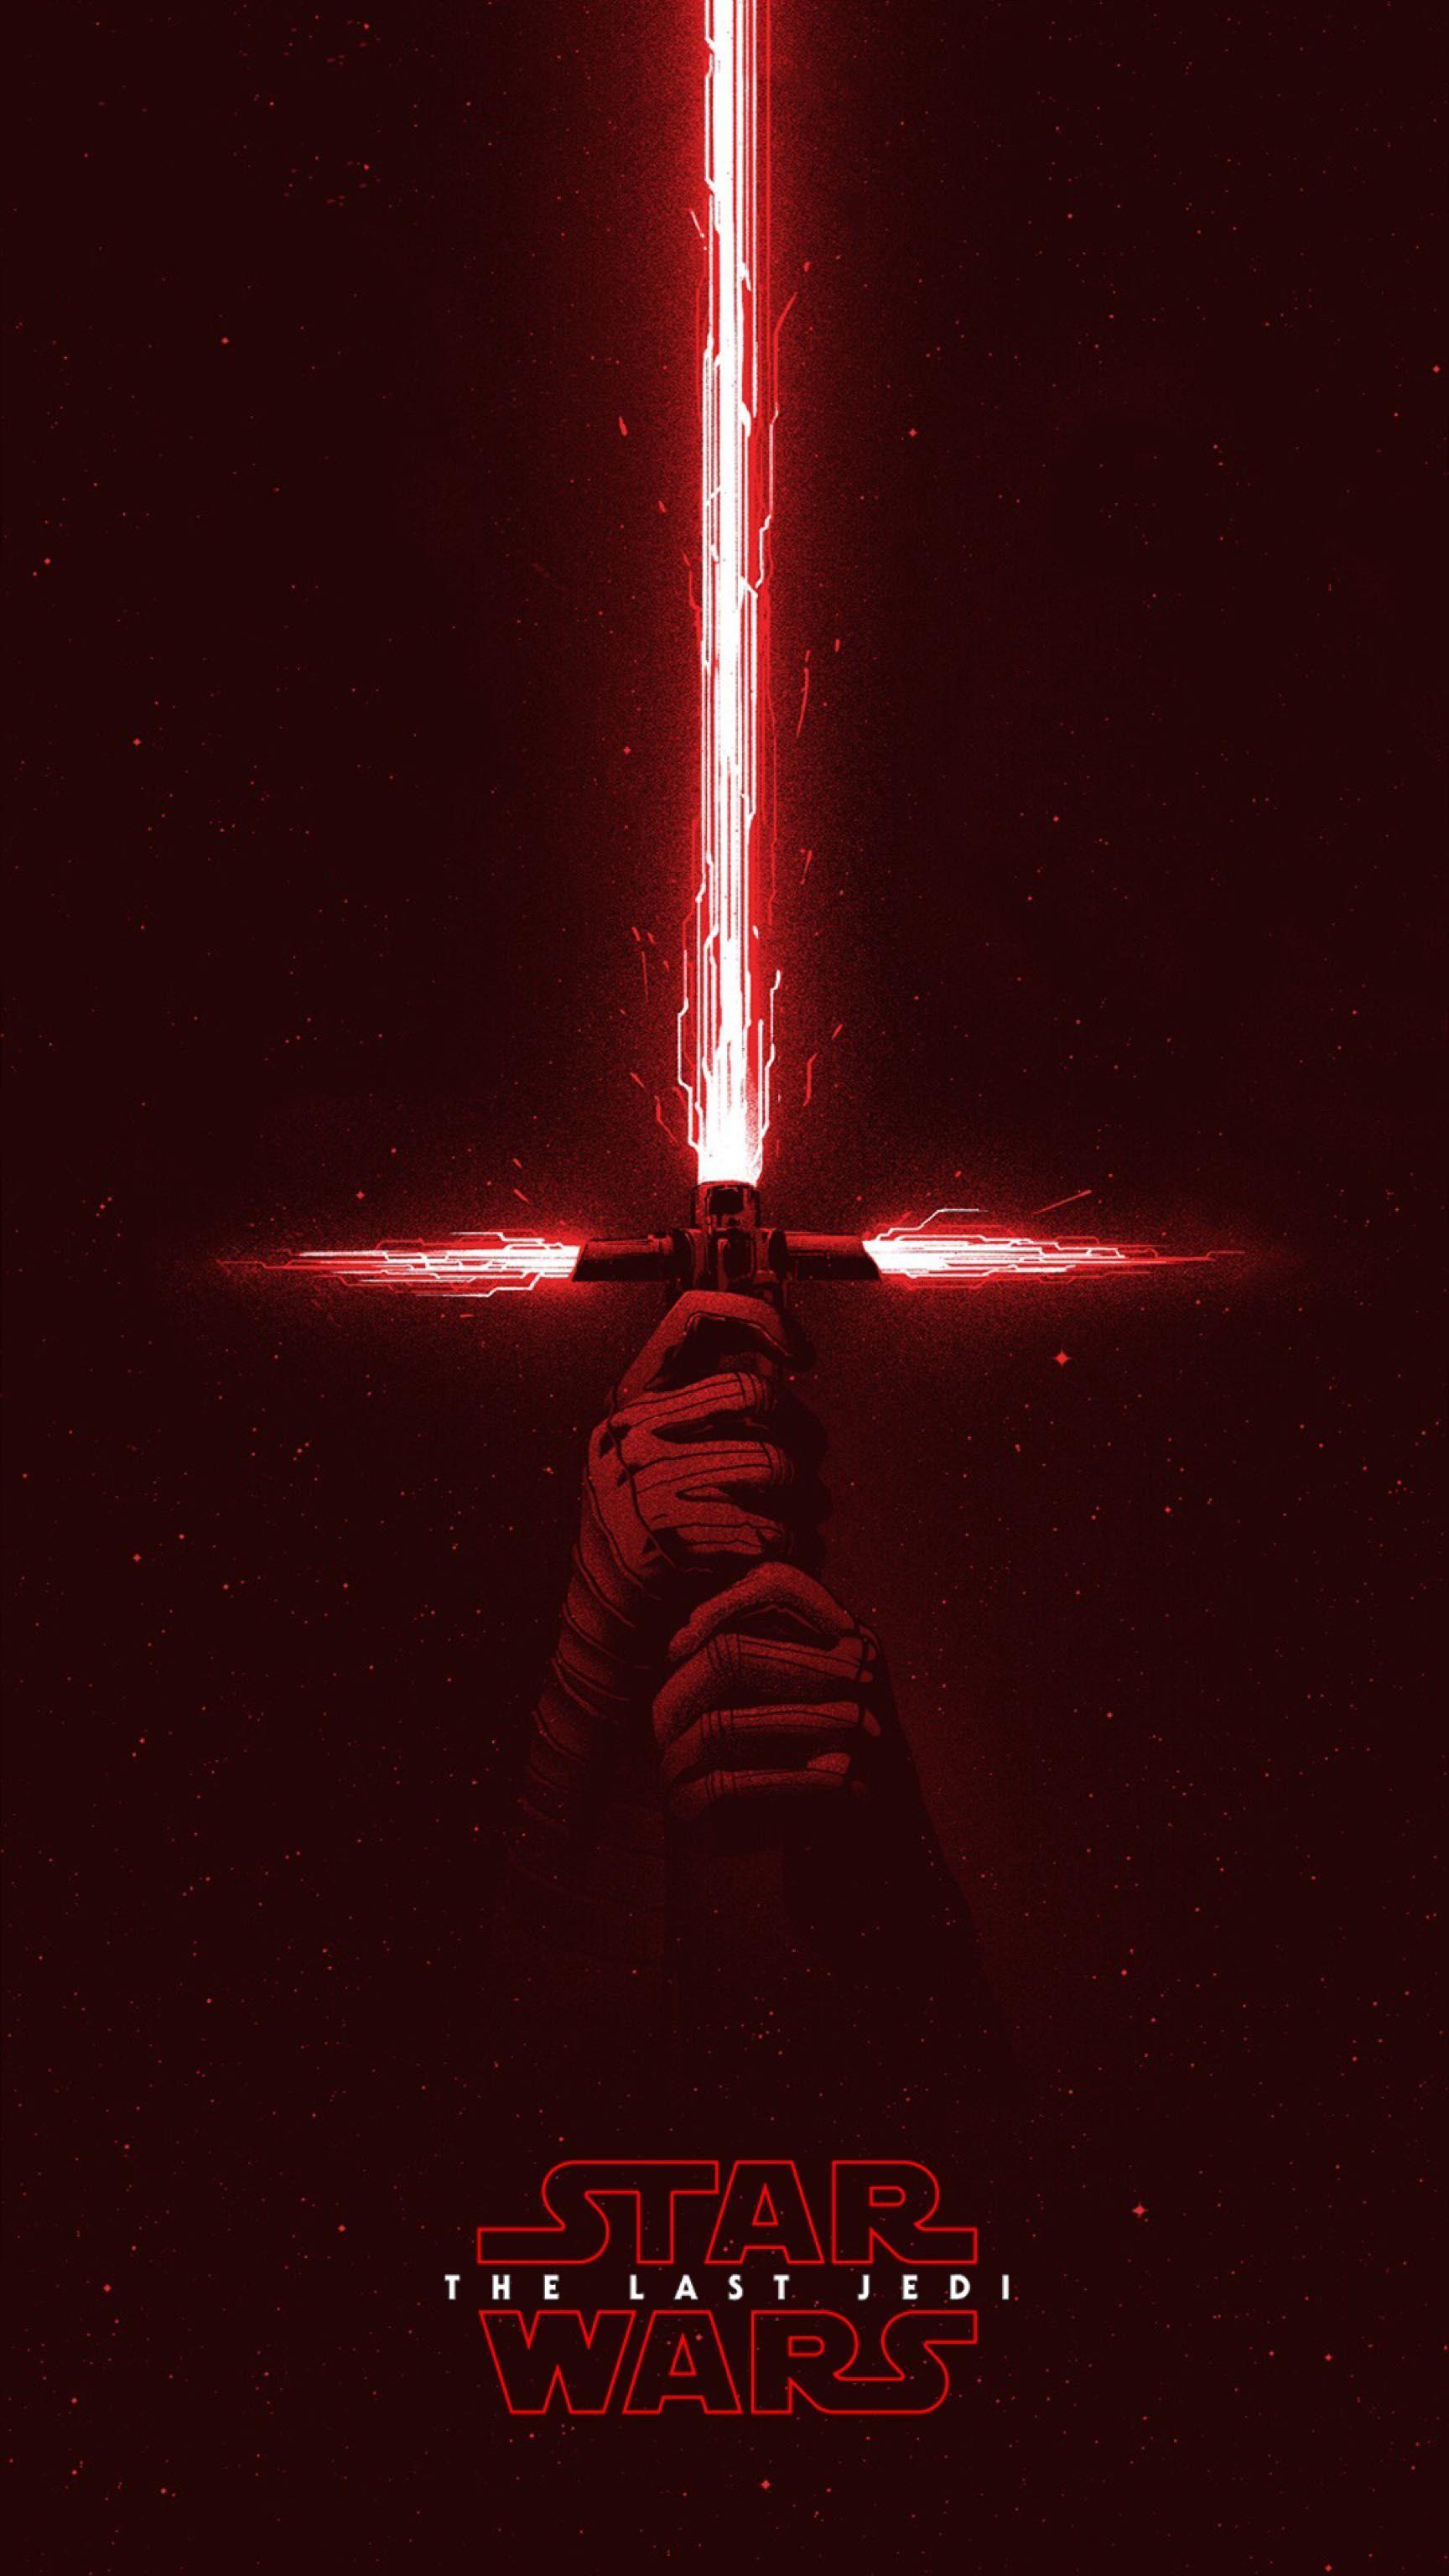 The Last Jedi Kylo Ren.heaven help us if hes the last Jedi. Kylo ren wallpaper, Star wars wallpaper, Star wars poster